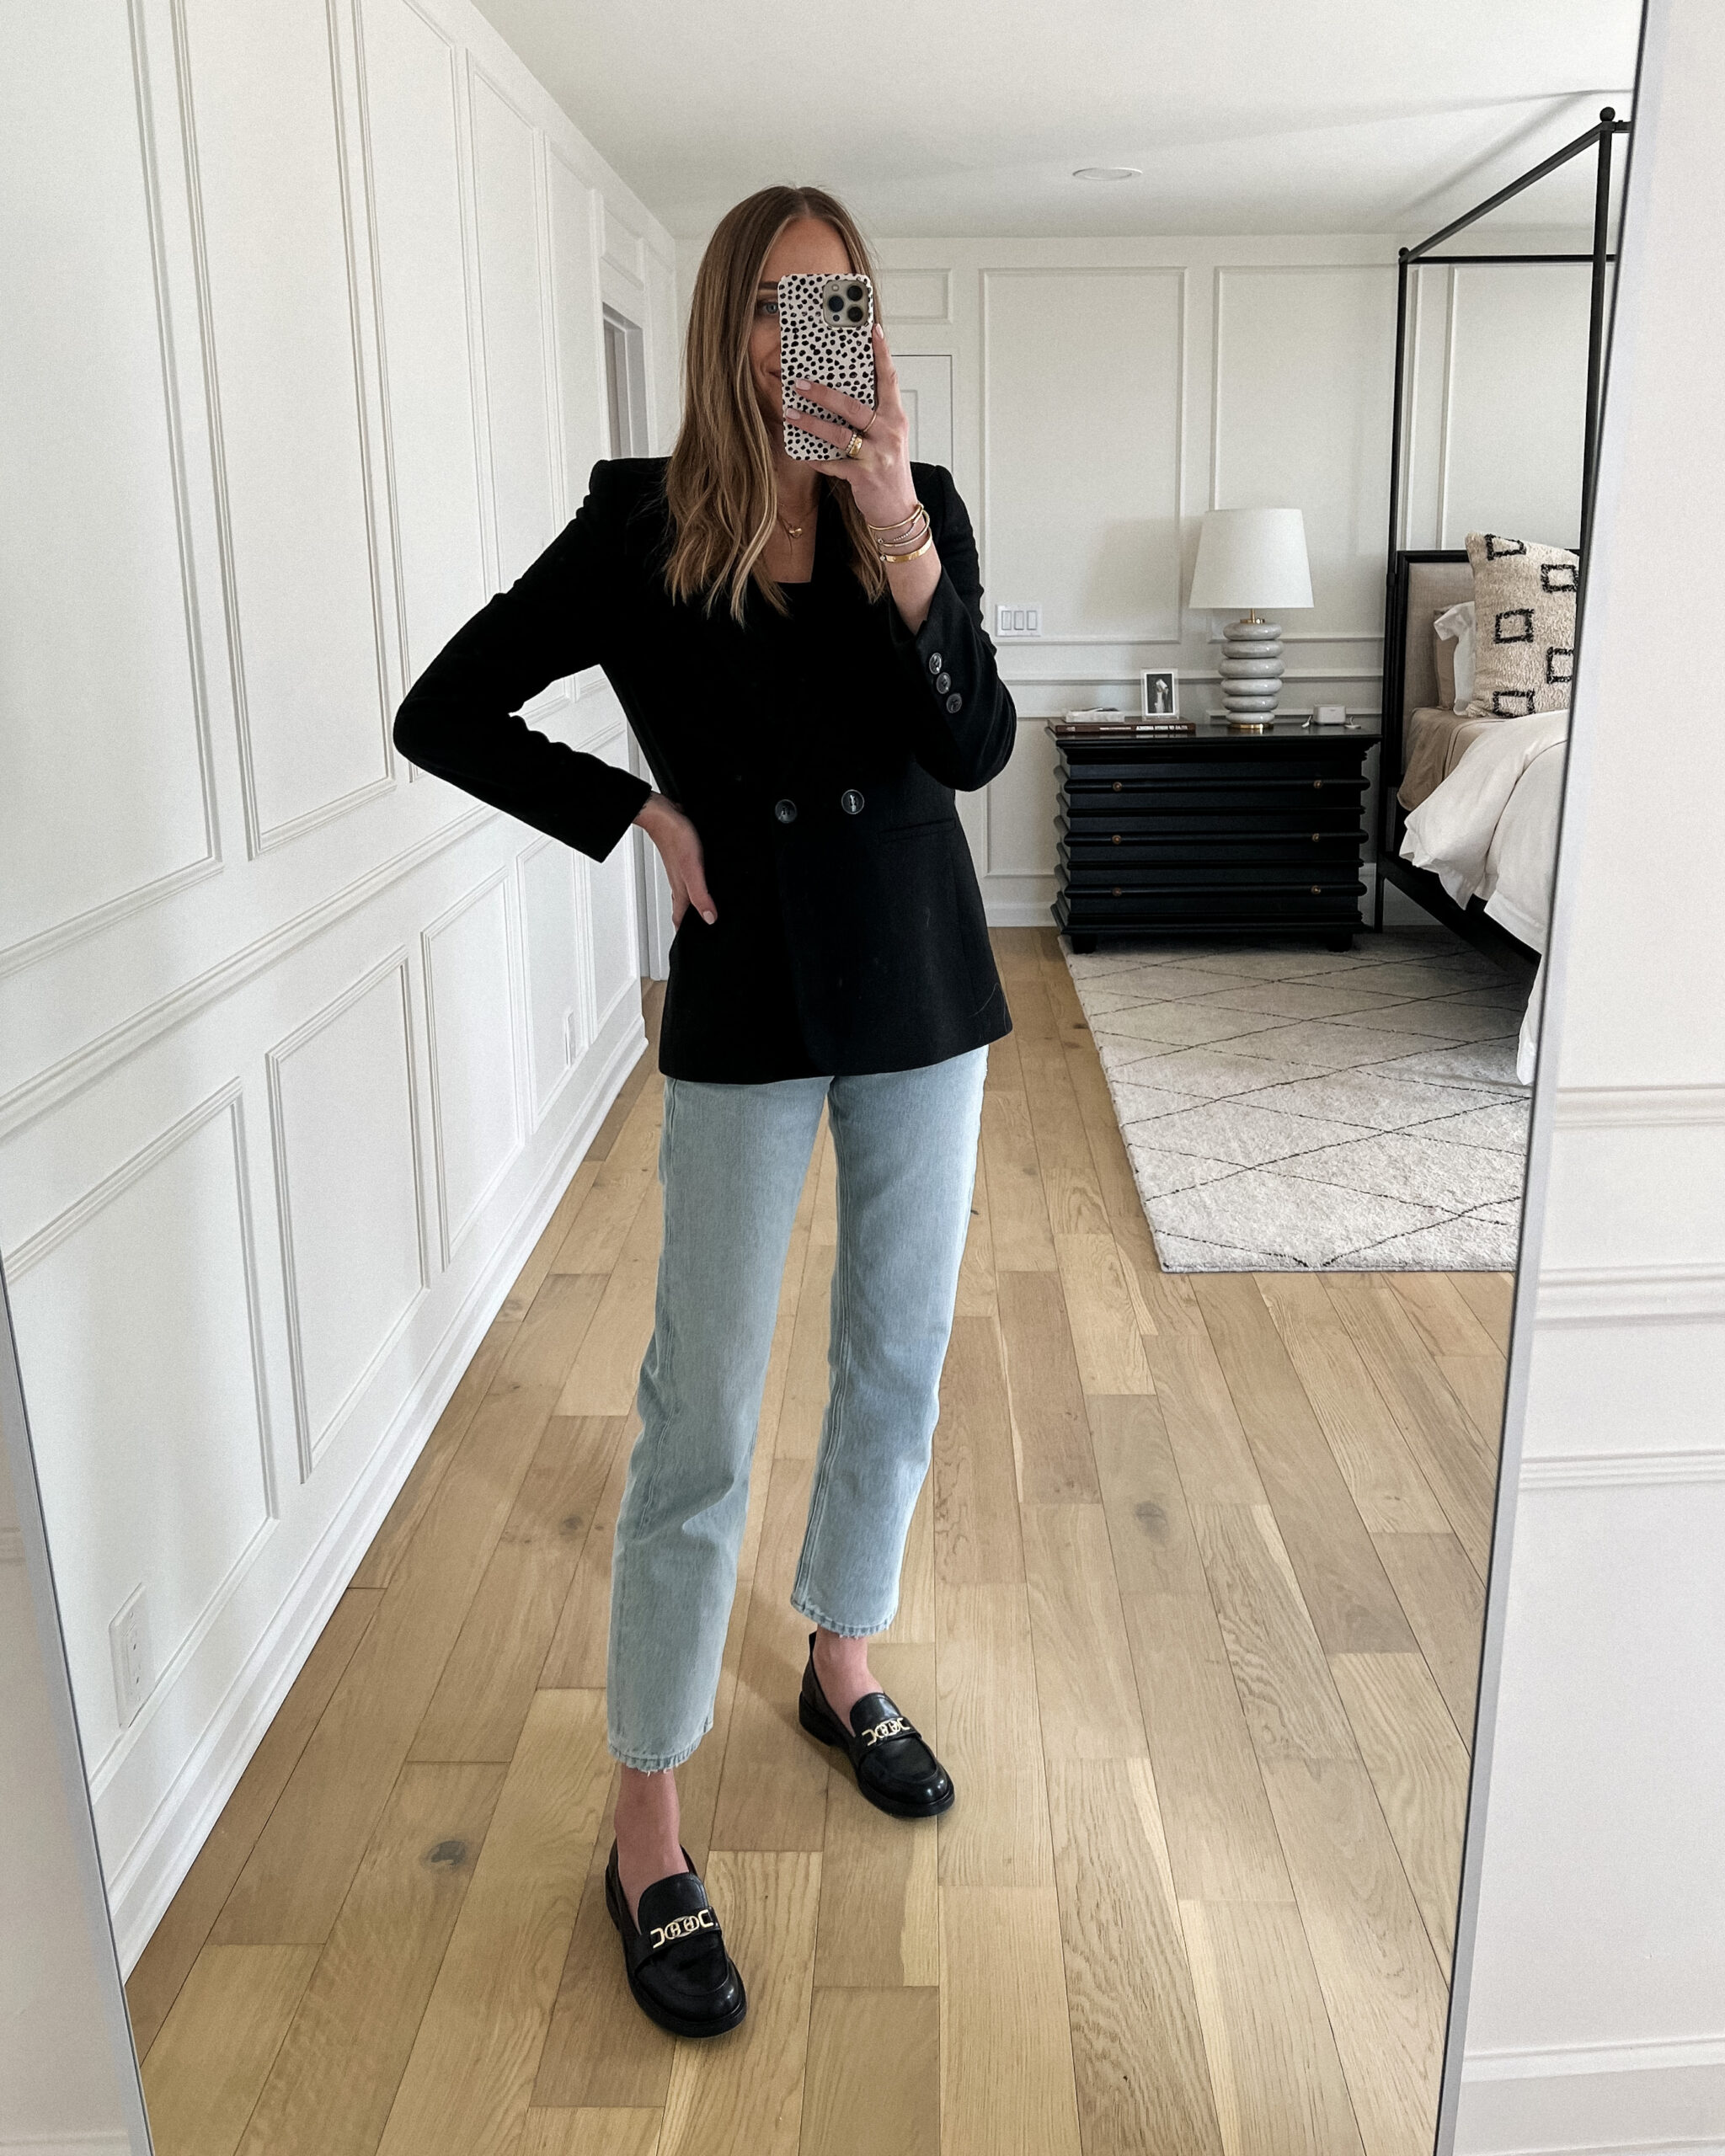 Fashion Jackson Wearing Anine Bing Madeleine Black Blazer AGODLE 90s Jeans Black Loafers Business Casual Outfit